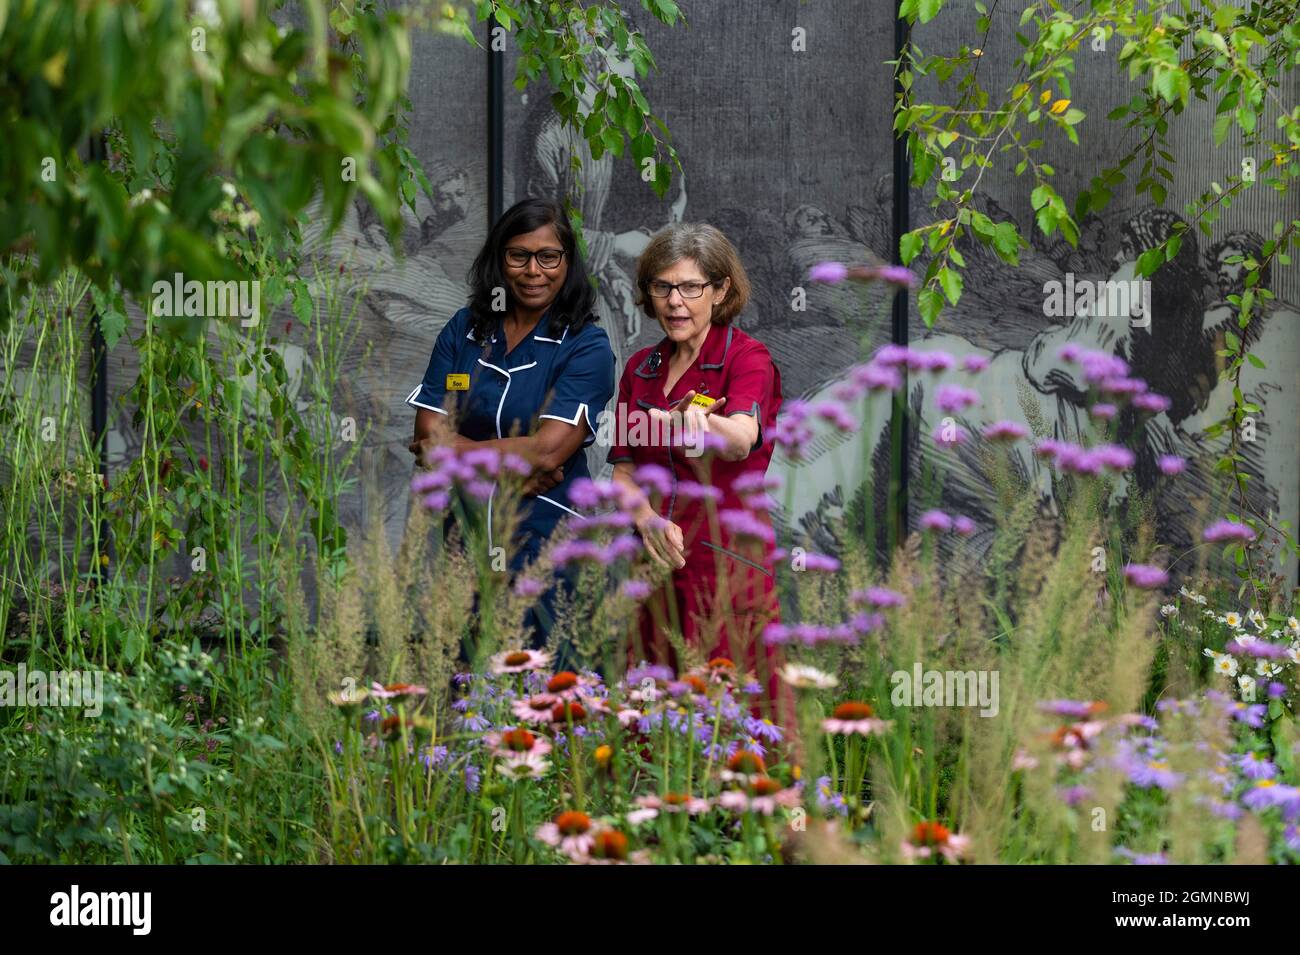 London, UK.  20 September 2021. Modern day nurses at The Florence Nightingale Garden, by Robert Myers, at the RHS Chelsea Flower Show. Cancelled due to Covid-19 concerns last year, this is the first time that the show has been held in September (usually May).  The show runs to 26 September at the Royal Hospital Chelsea.  Credit: Stephen Chung / Alamy Live News Stock Photo